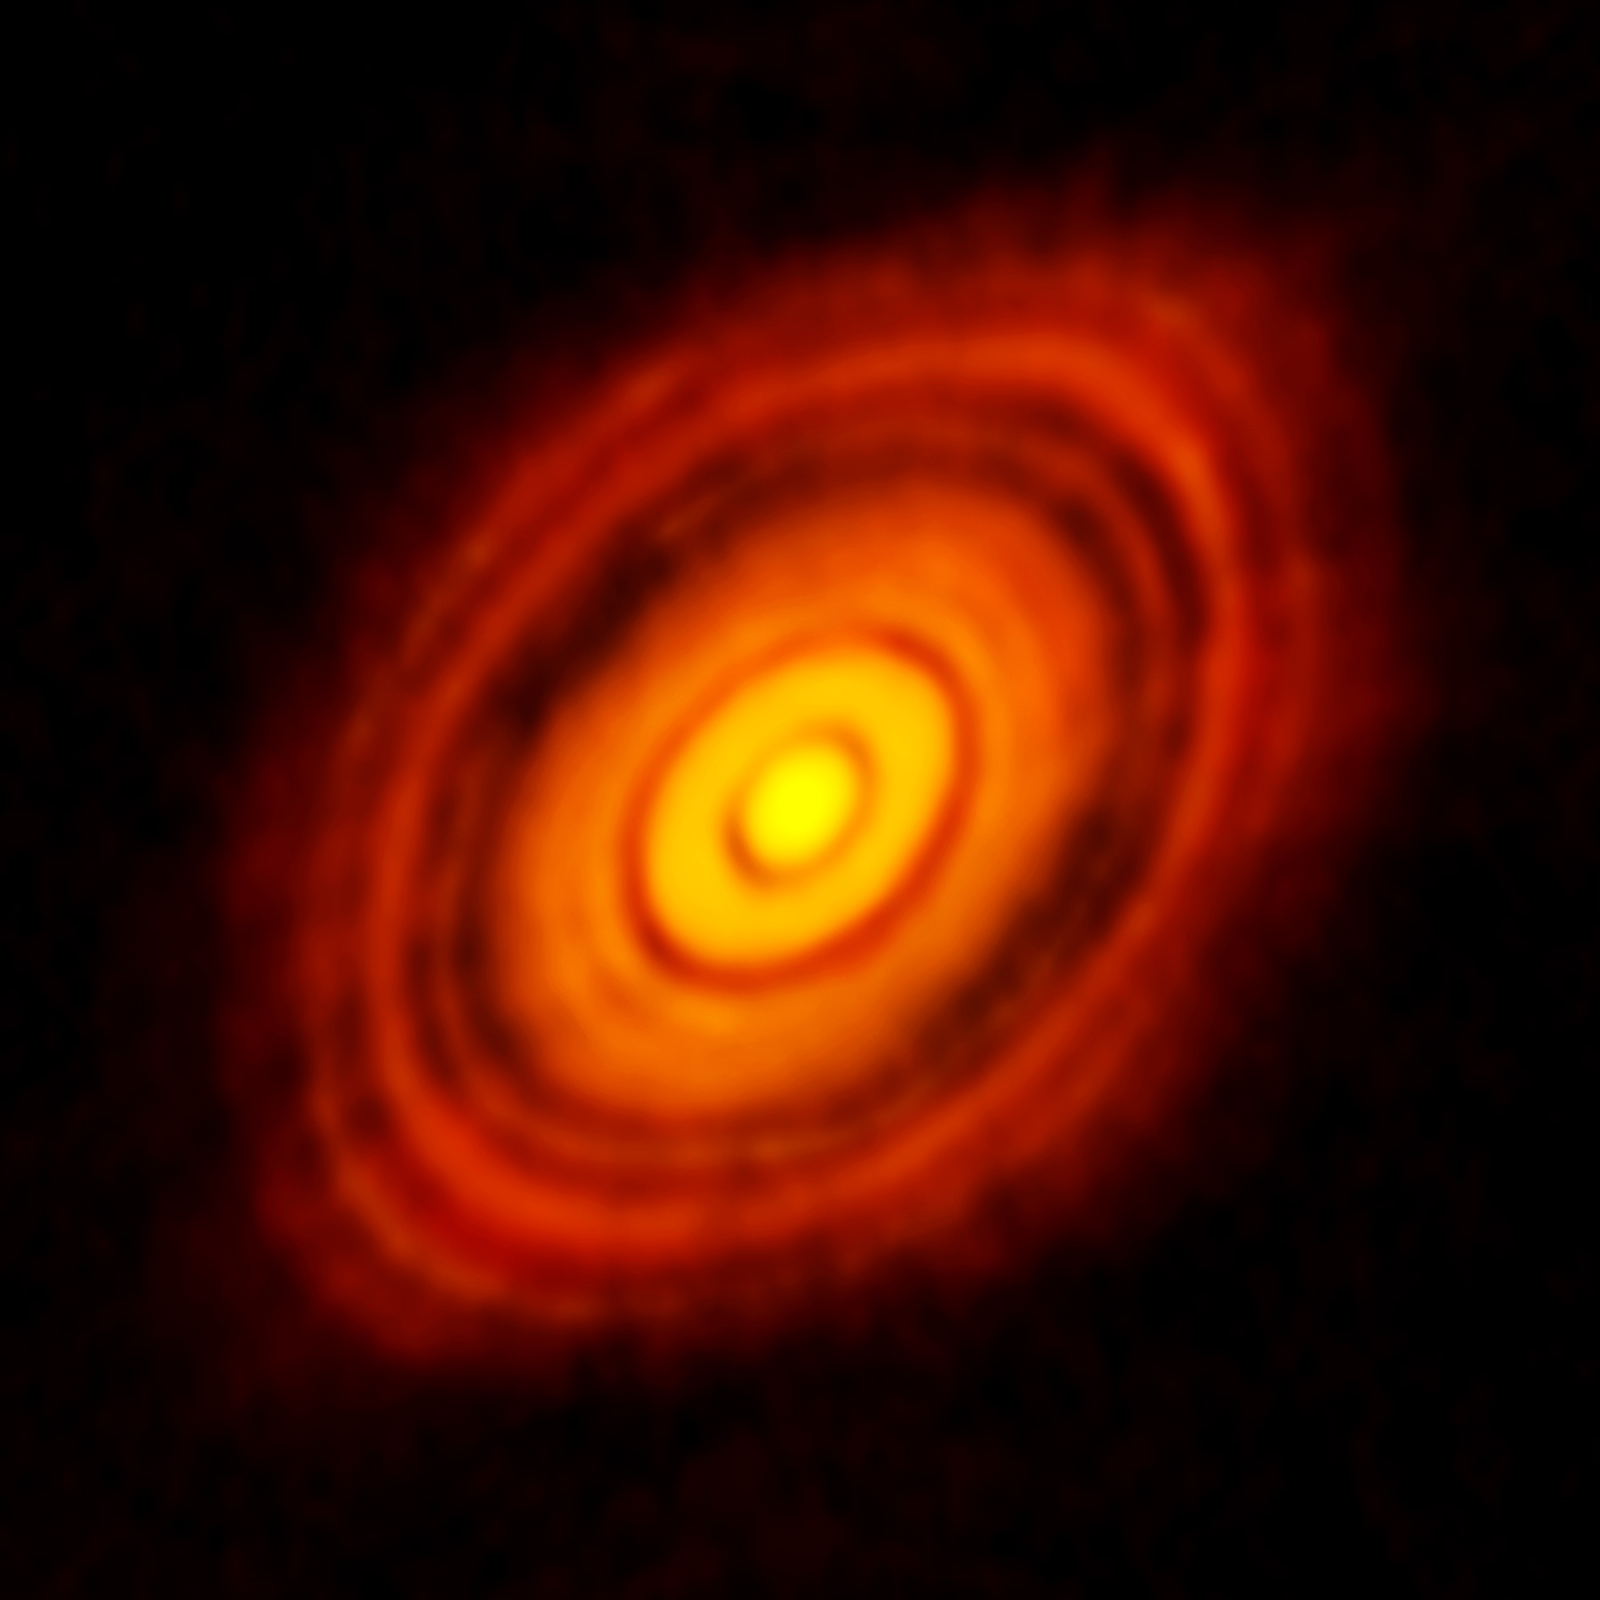 Bright orange and yellow concentric rings of a protoplanetary disk on a black background